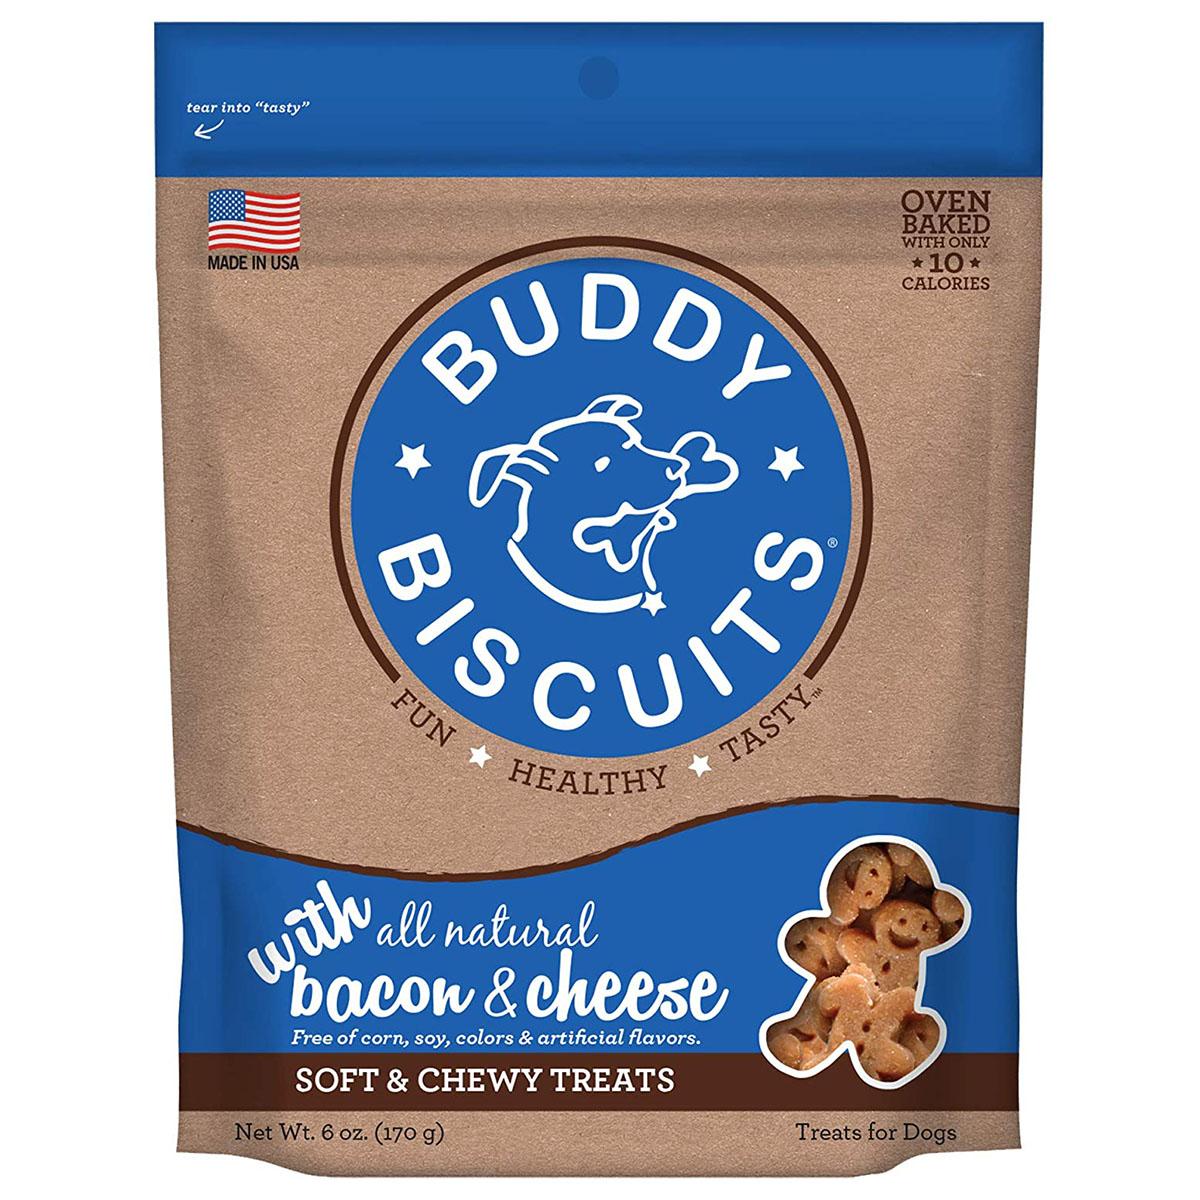 Buddy Biscuits Whole Grain Soft & Chewy Dog Treats - Bacon & Cheese